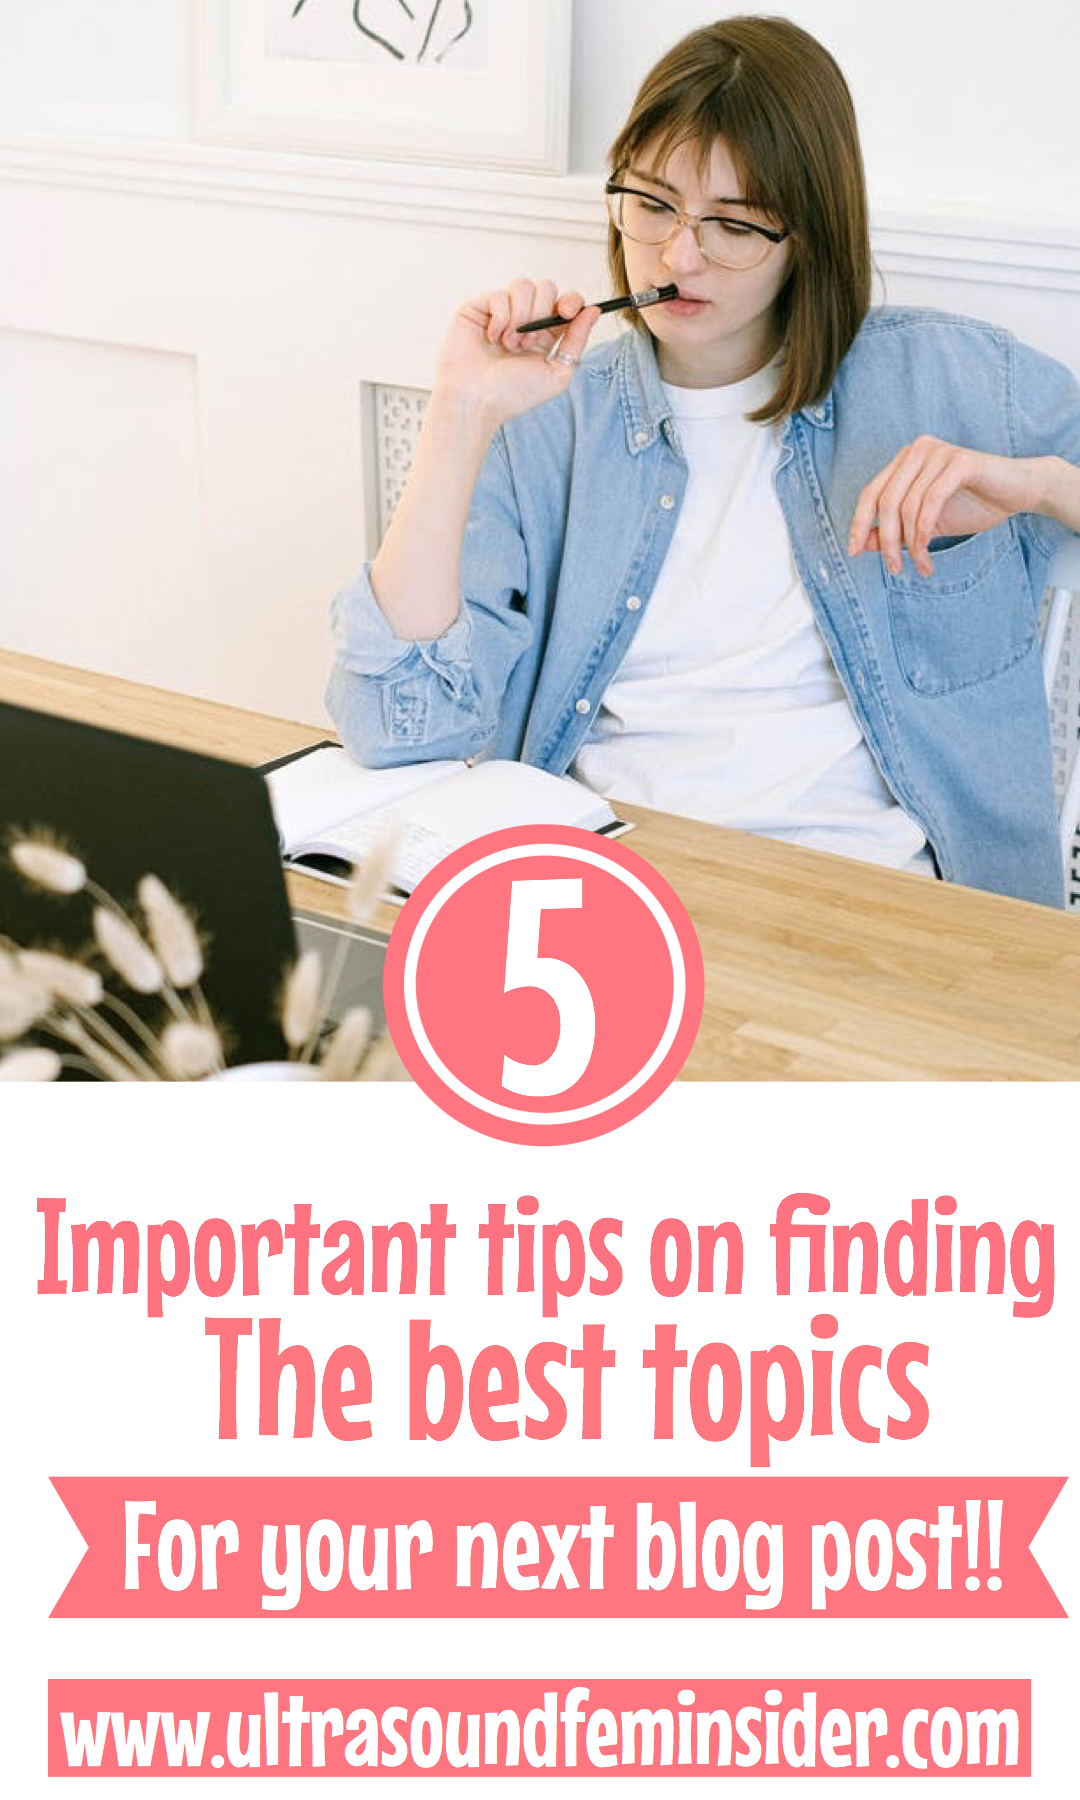 To keep your blog as fresh as possible, consider using these five ways to find winning ideas for your blog topics.